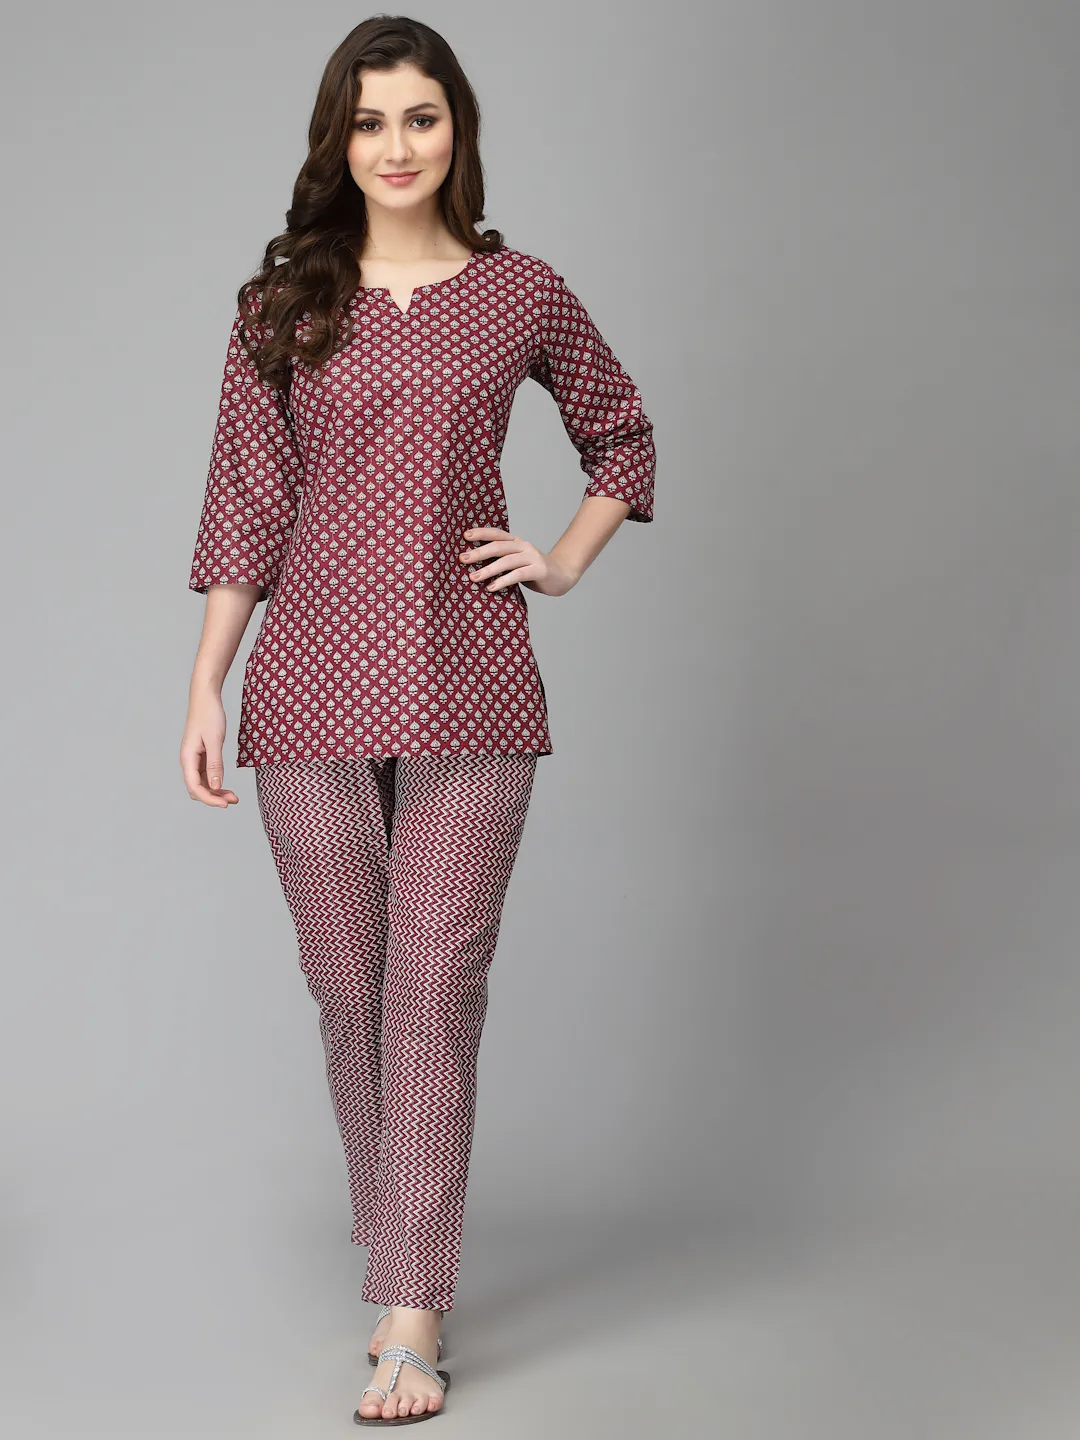 new arrival night suit front open and lower pant shirt and pajama coord set  nightsuit for women in affordable price